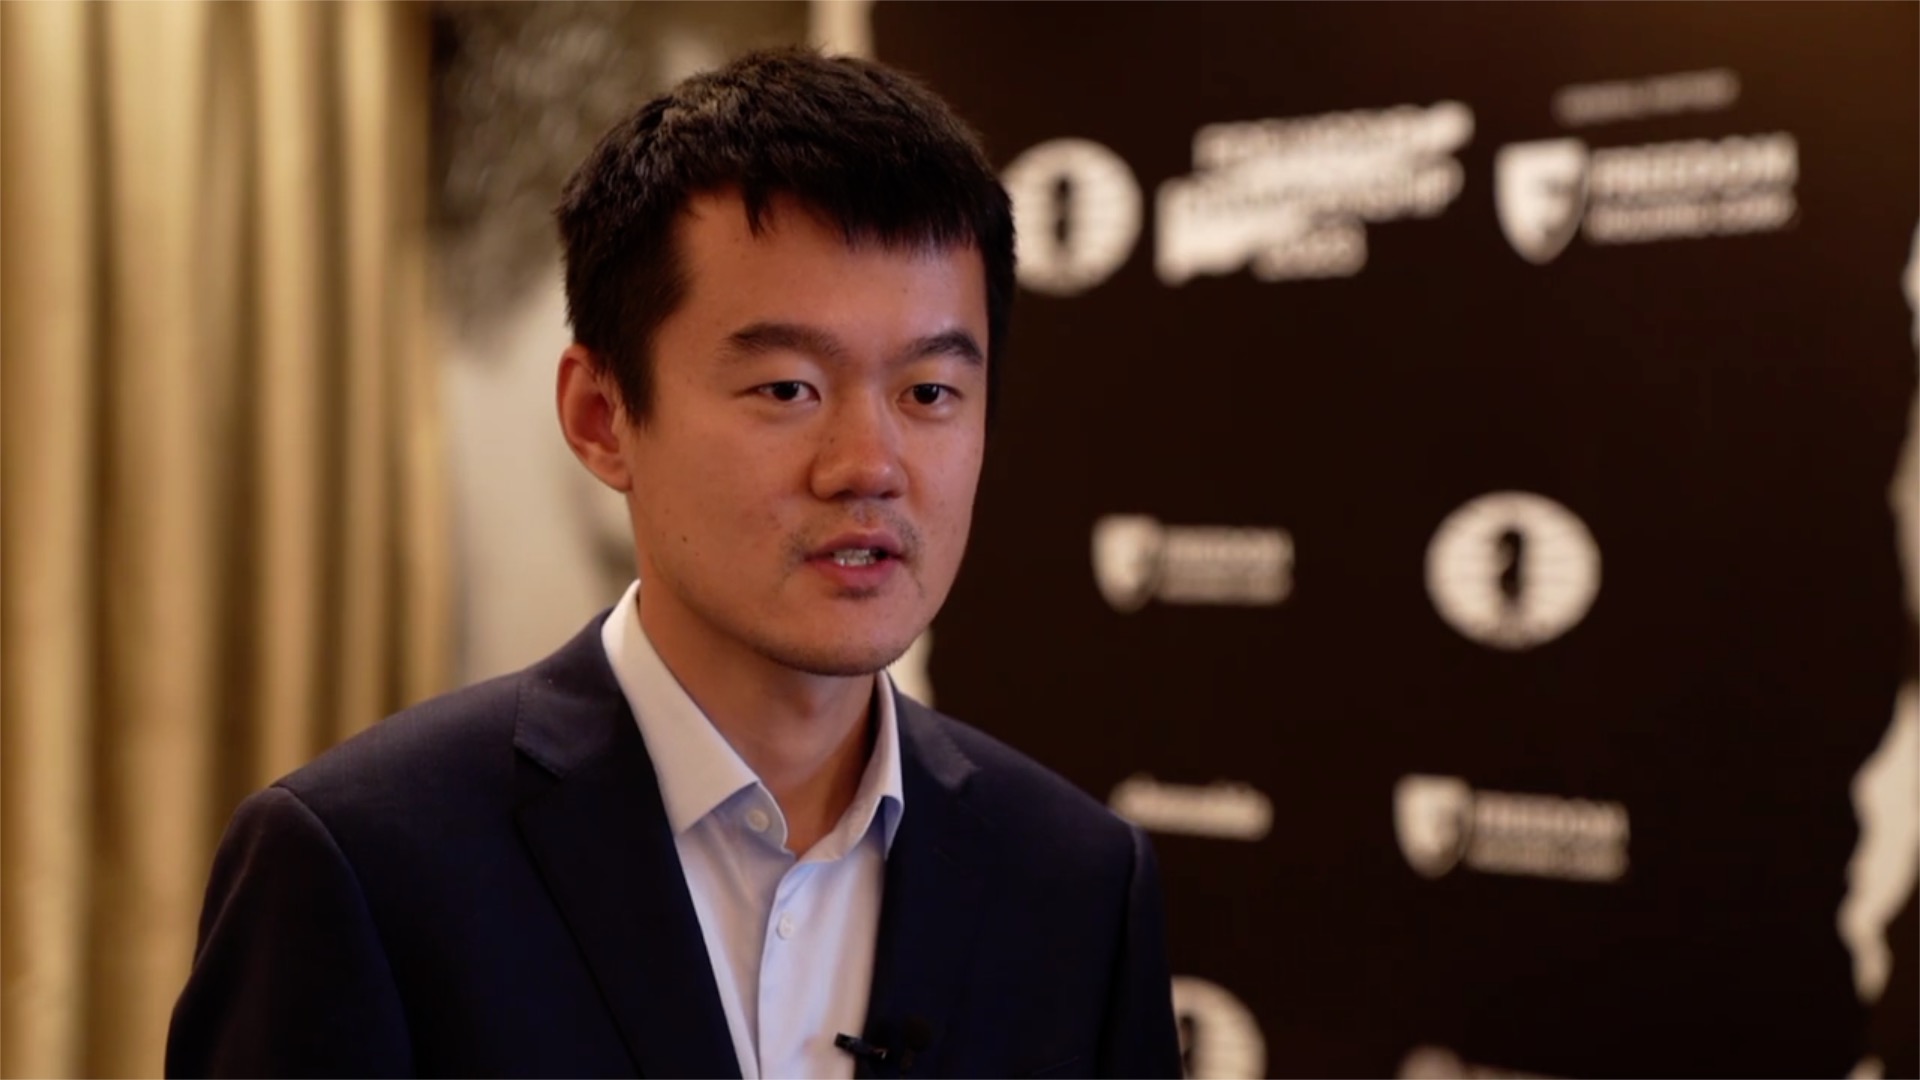 Exclusive interview with world chess champion Ding Liren - CGTN